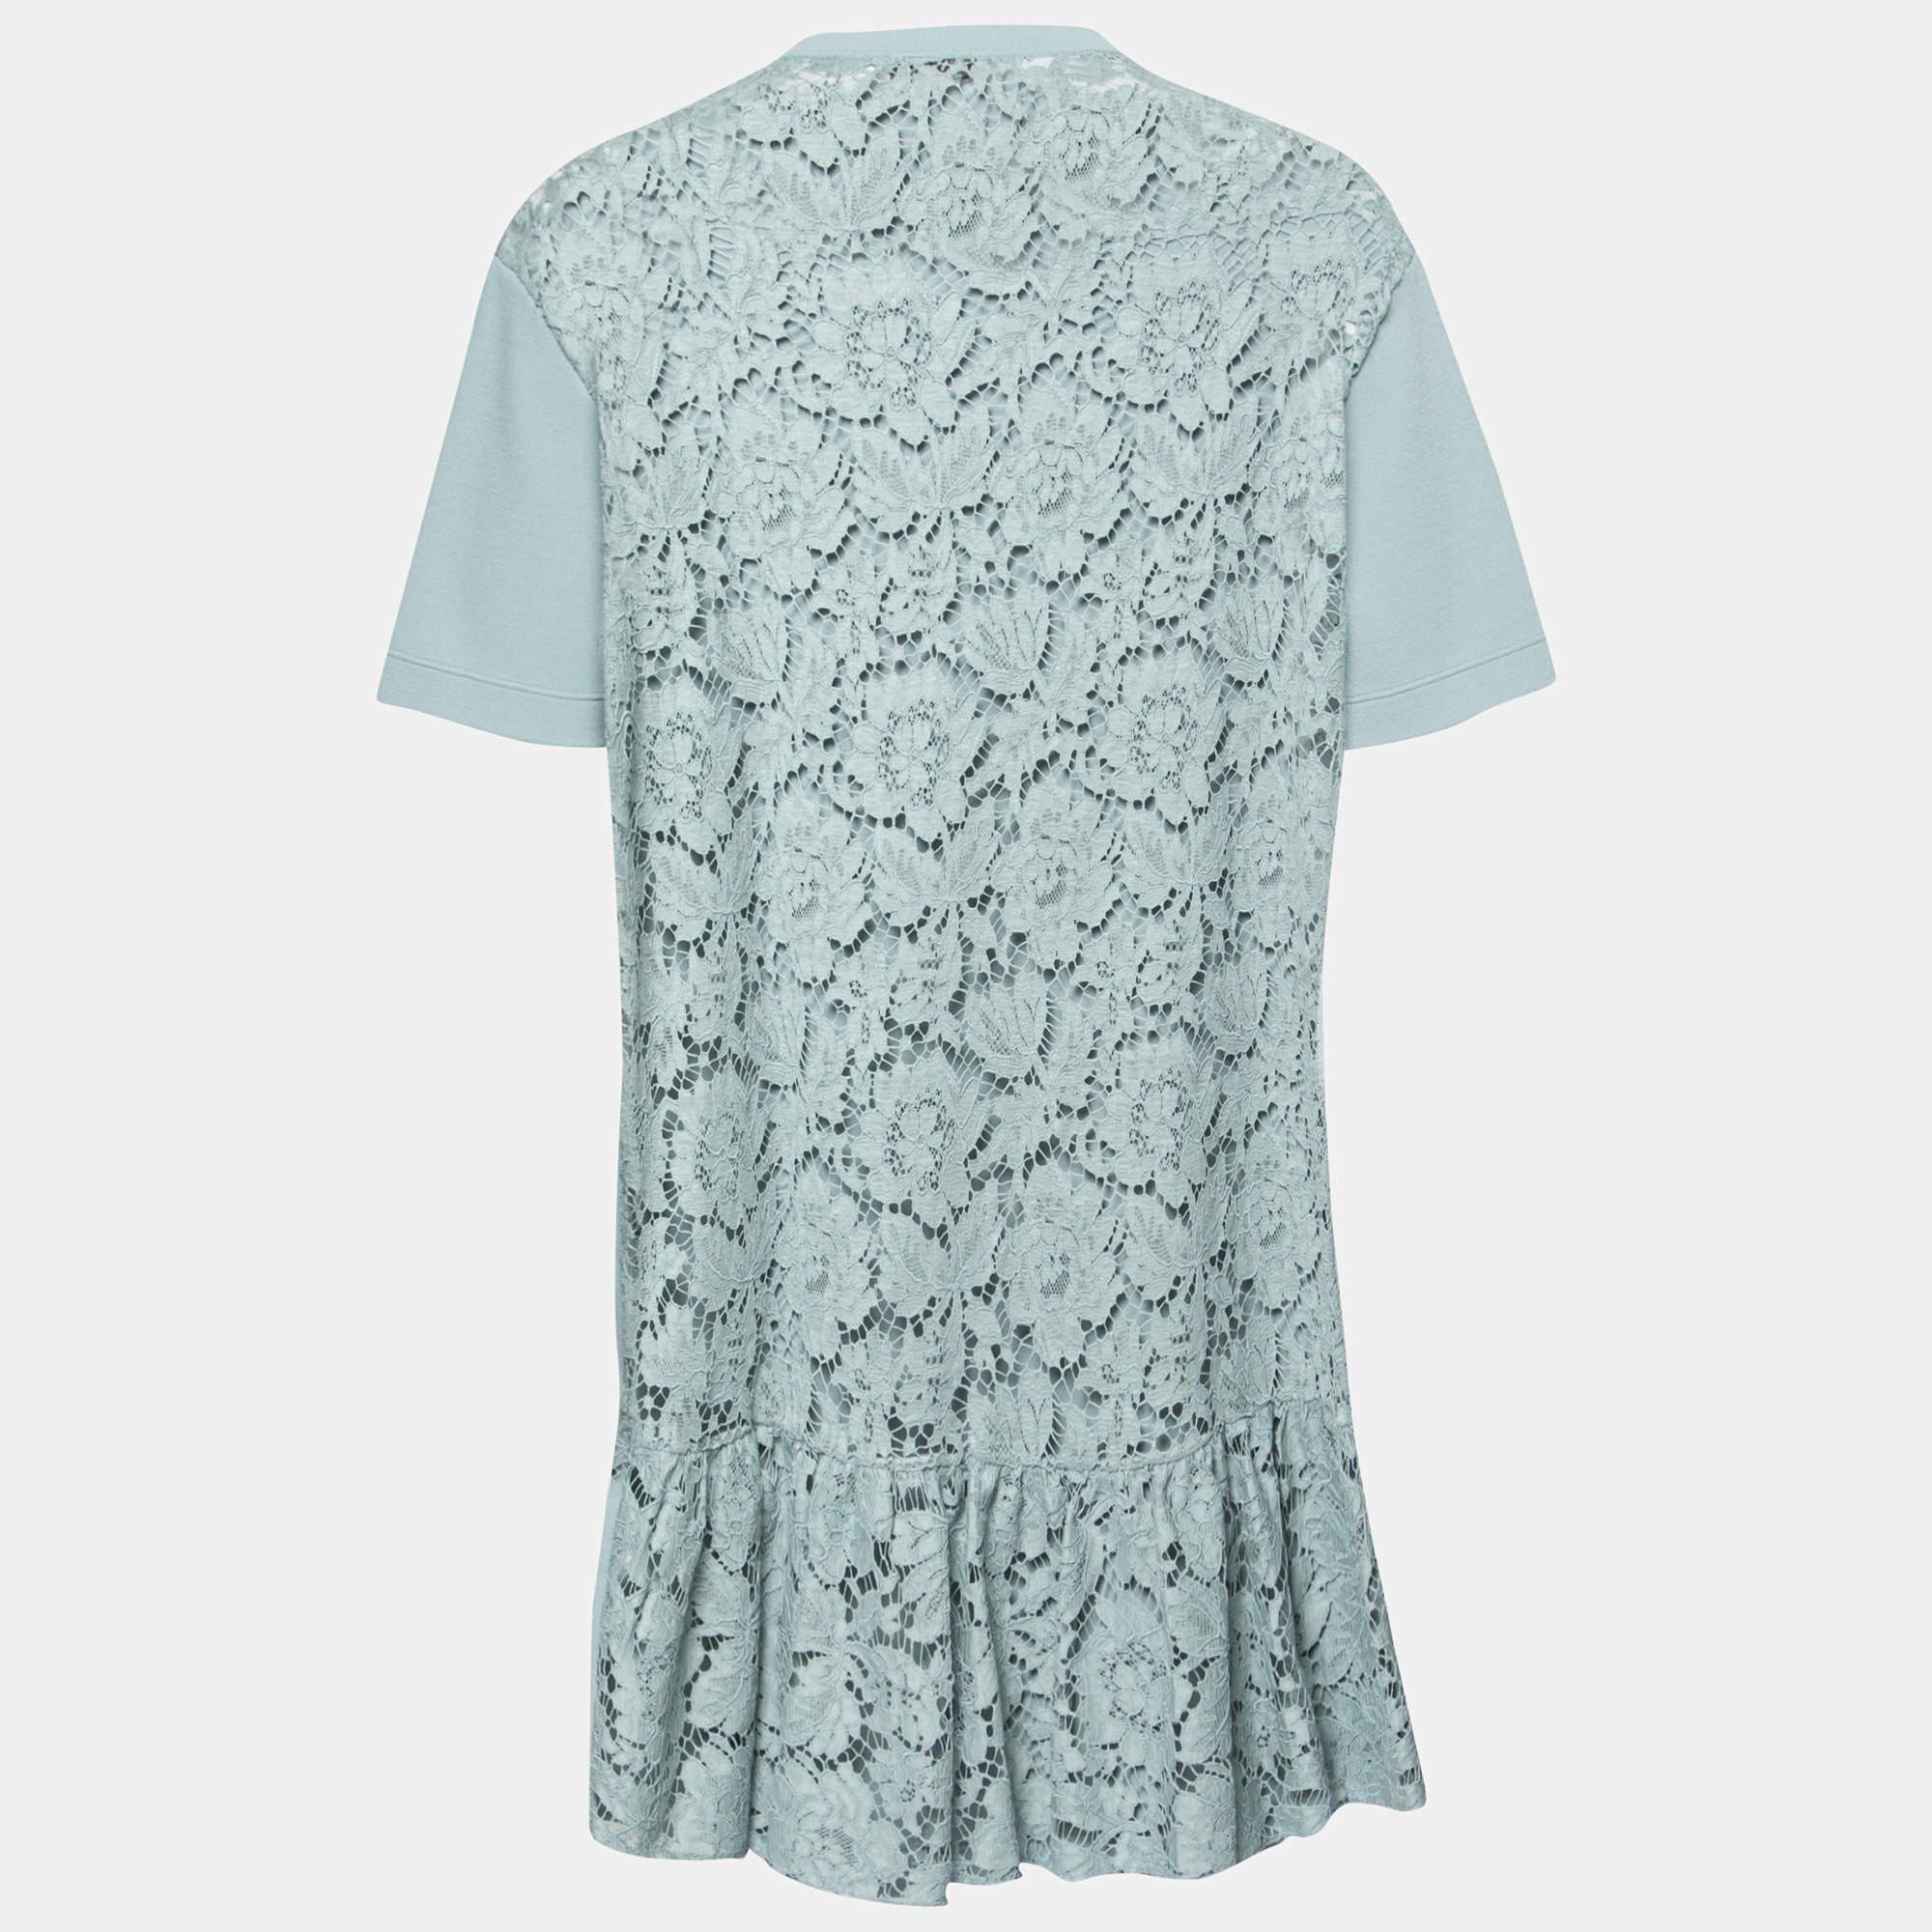 This Valentino dress is distinguished by two different designs on its back and front. Made from a mix of quality fabrics, its backside is intricately decorated with lace detailing and panels at the hem. Short sleeves and a round neckline complete